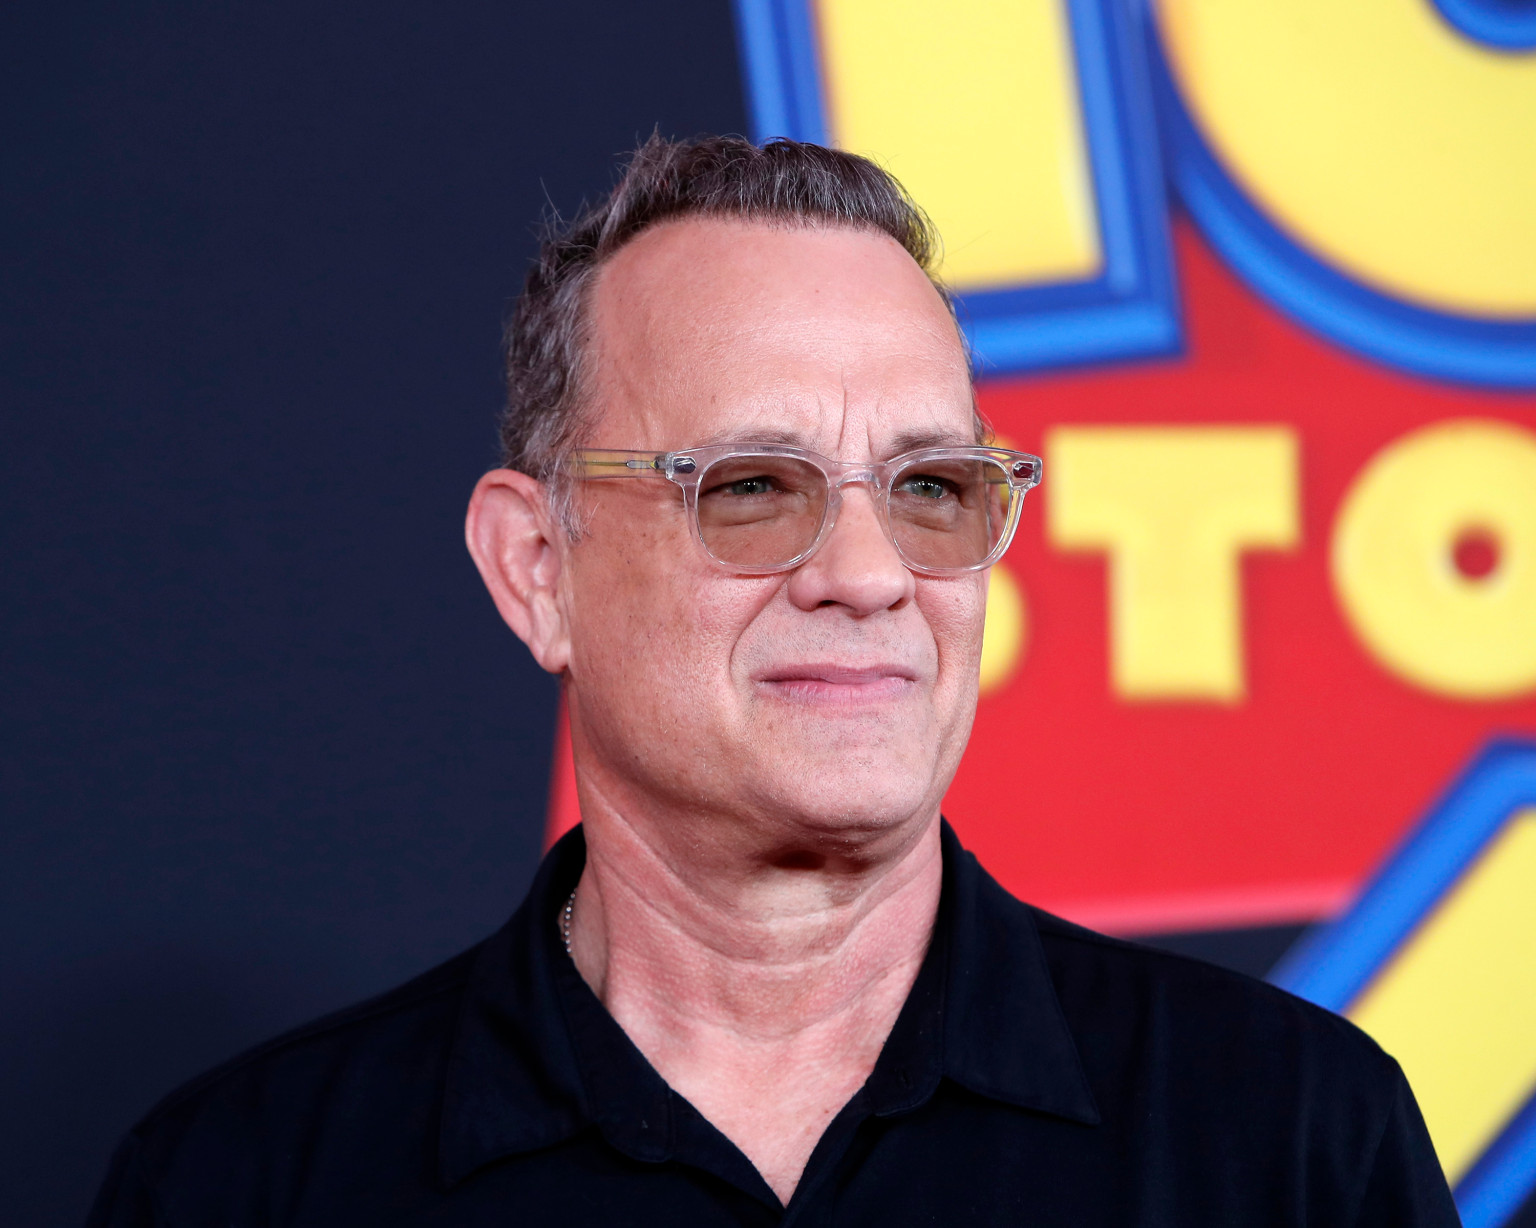 Little Known Facts About Acting Legend Tom Hanks Factinate